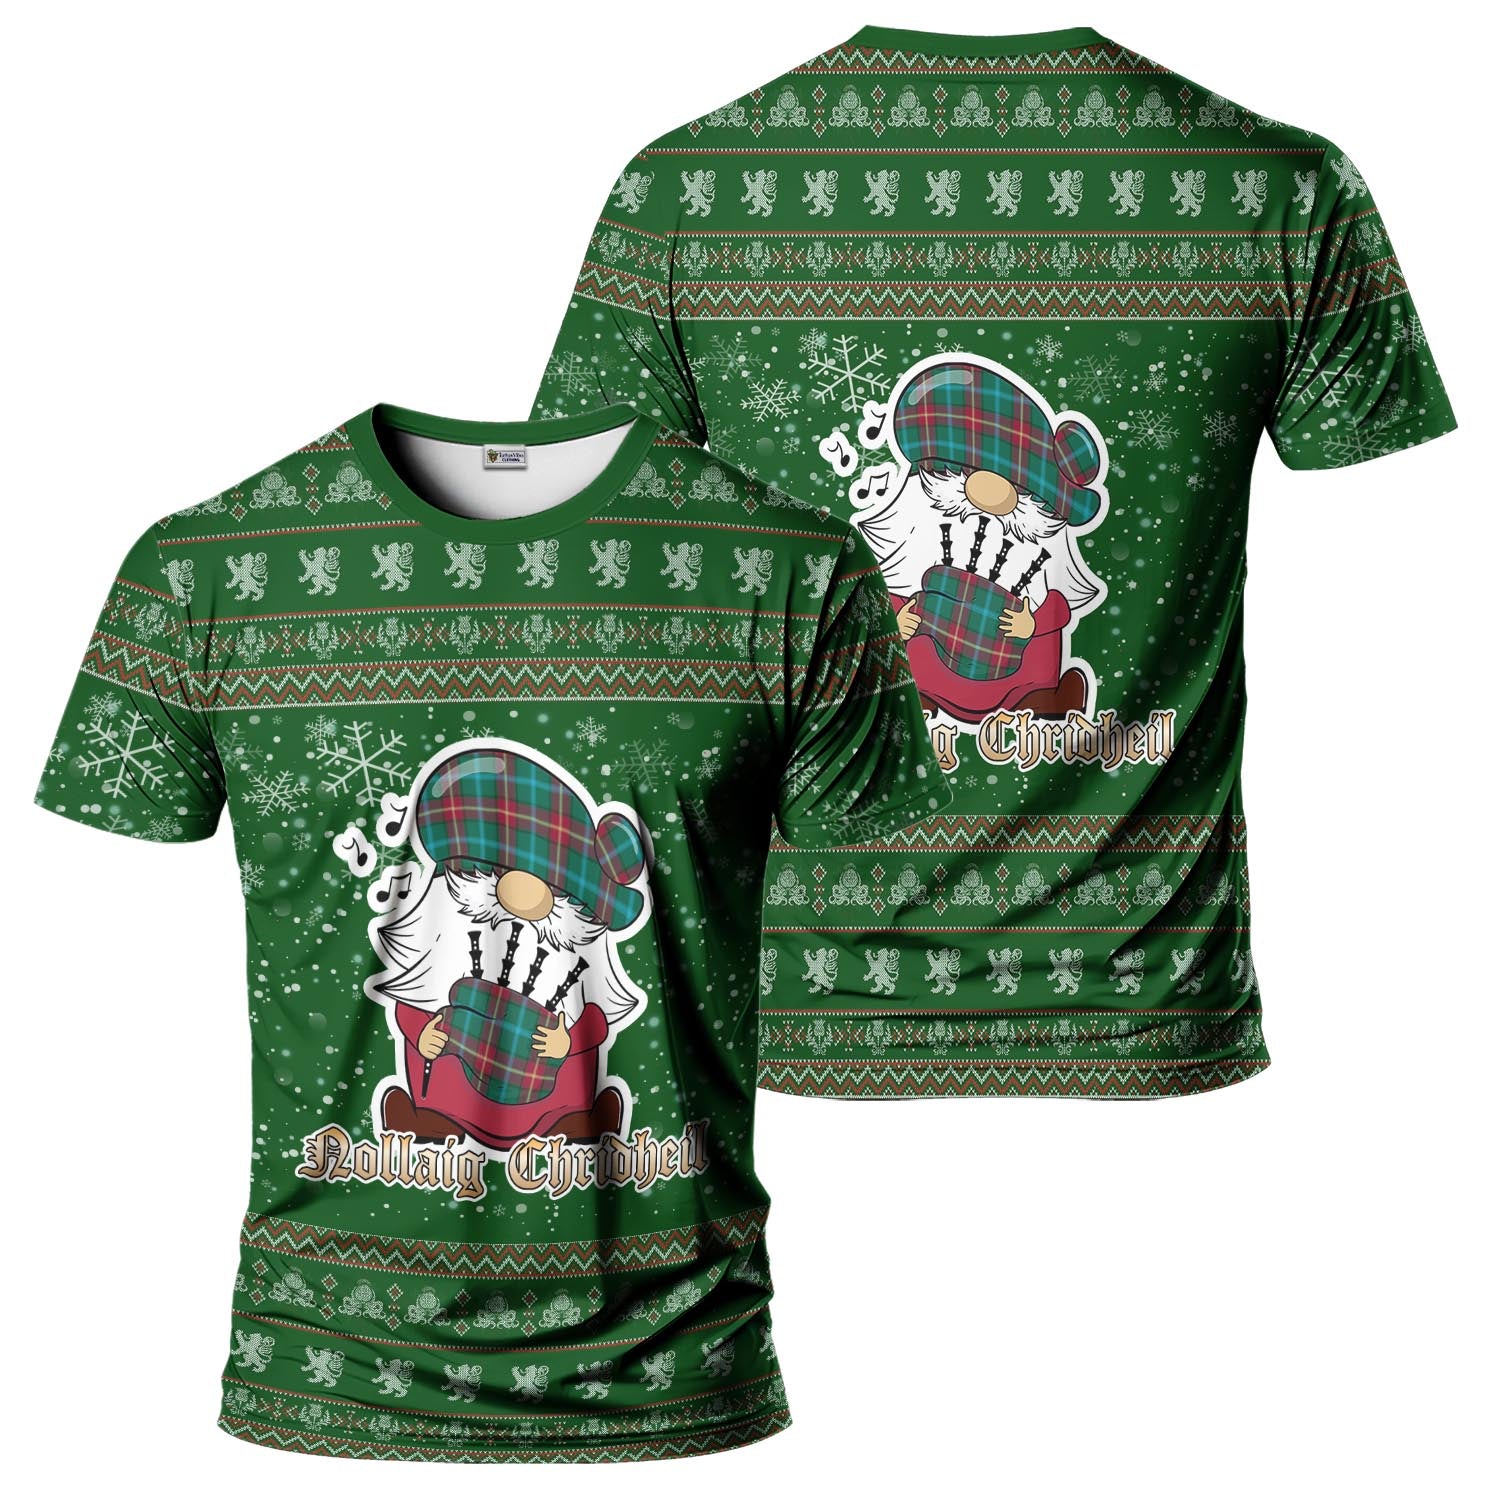 Manitoba Province Canada Clan Christmas Family T-Shirt with Funny Gnome Playing Bagpipes Men's Shirt Green - Tartanvibesclothing